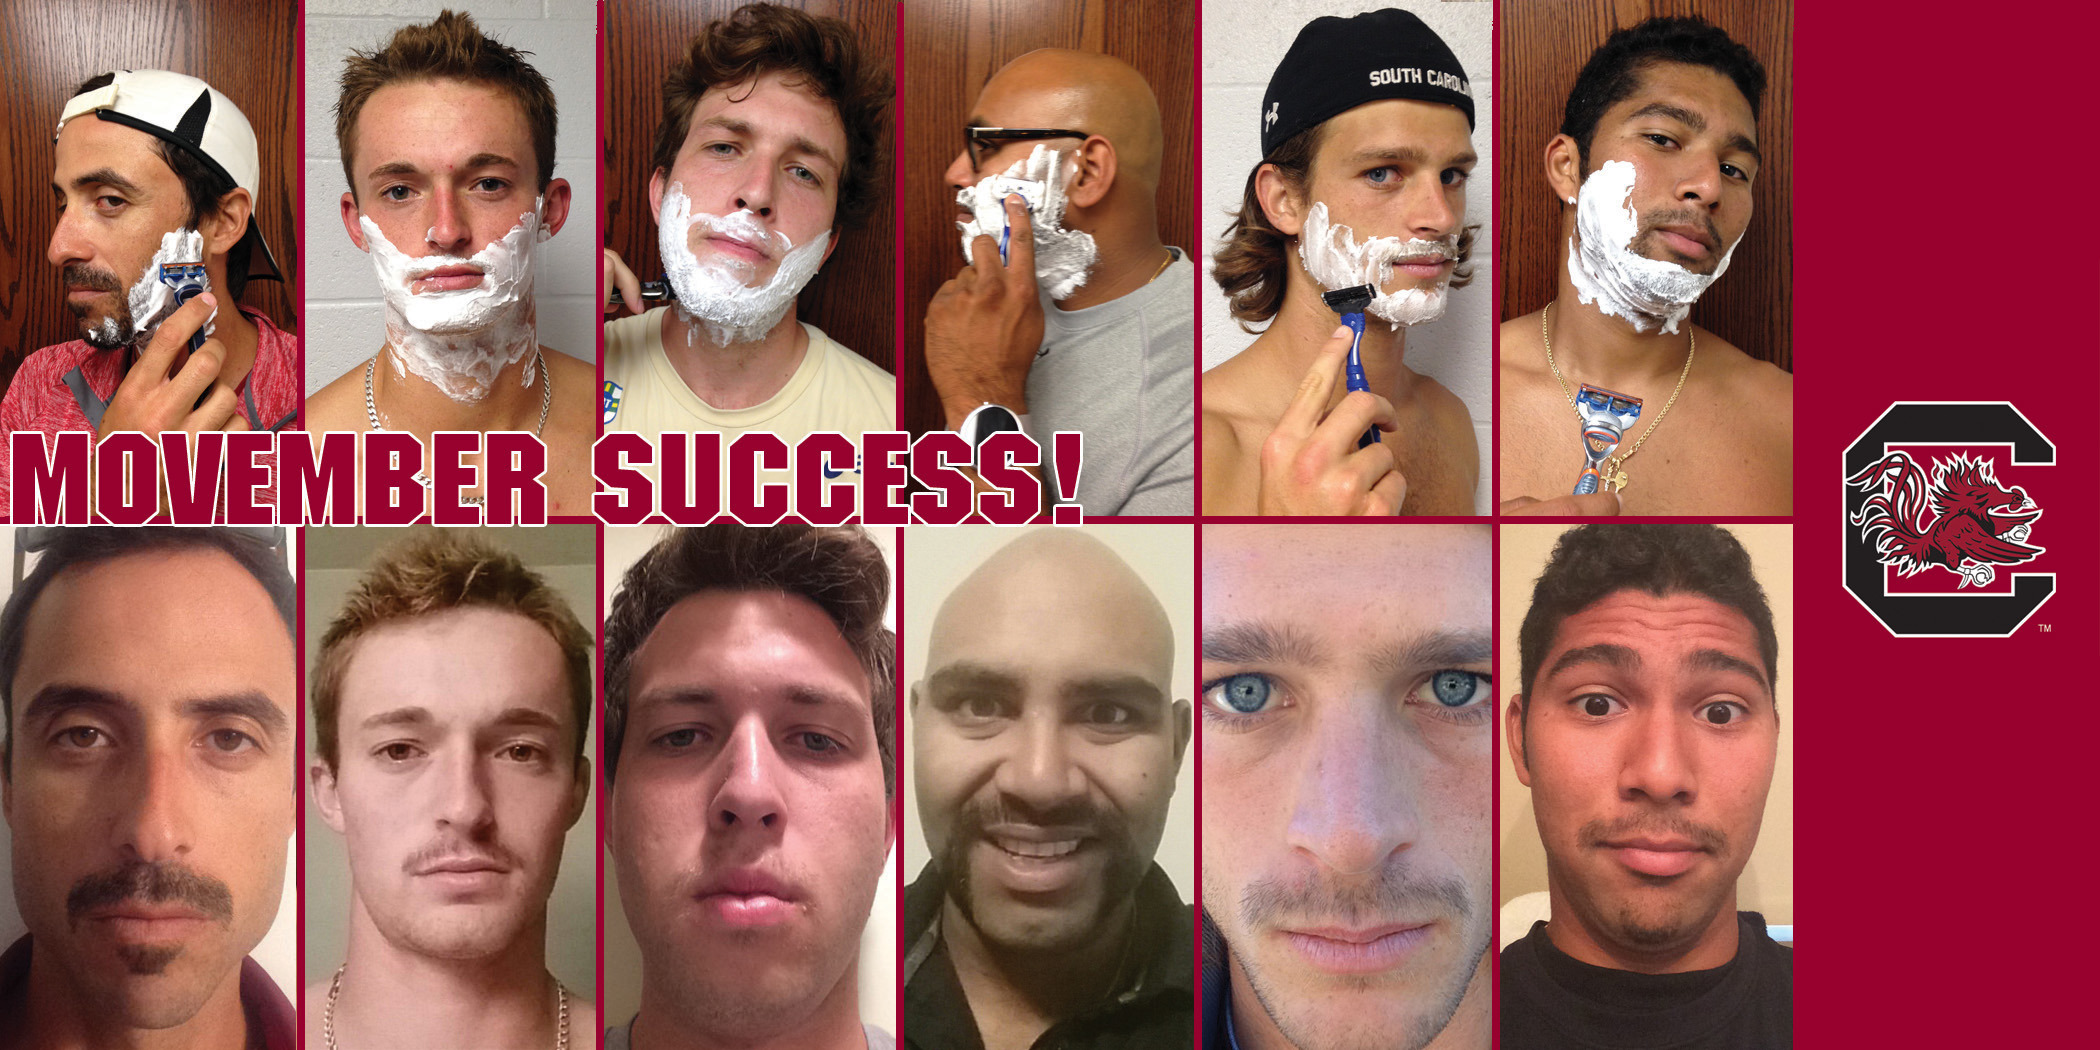 Men's Tennis Helps Change the Face of Men's Health with "Movember"